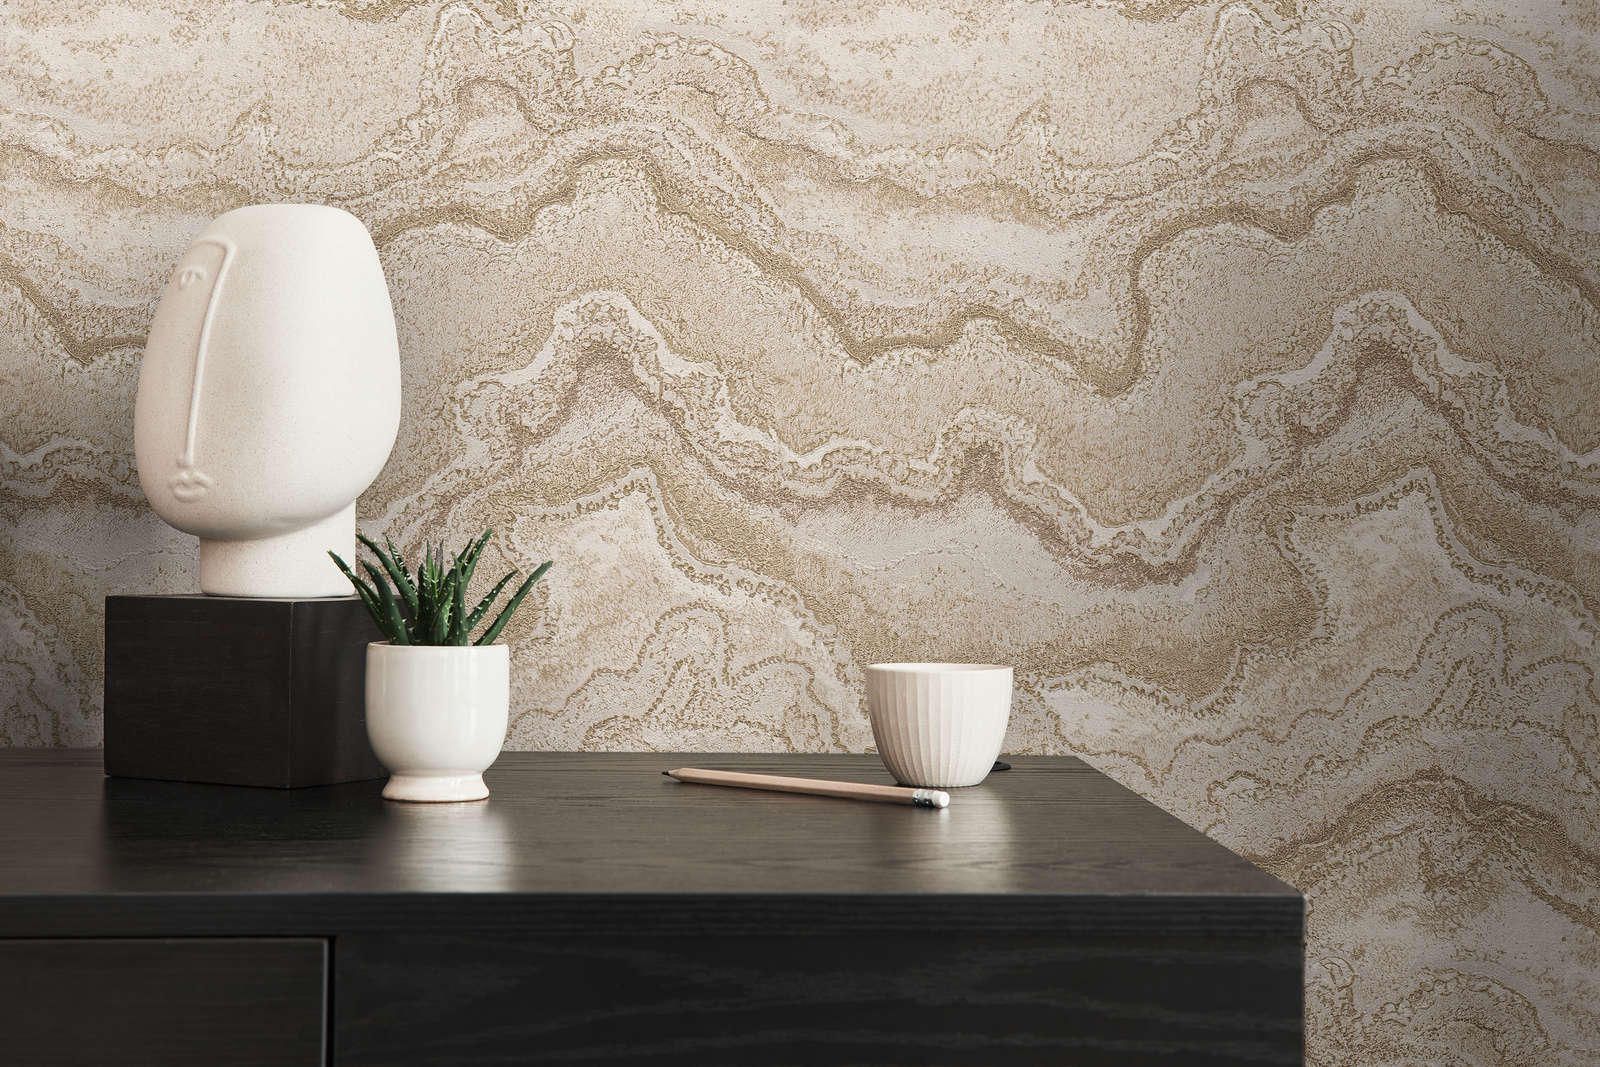             Marbled non-woven wallpaper with texture - grey, gold
        